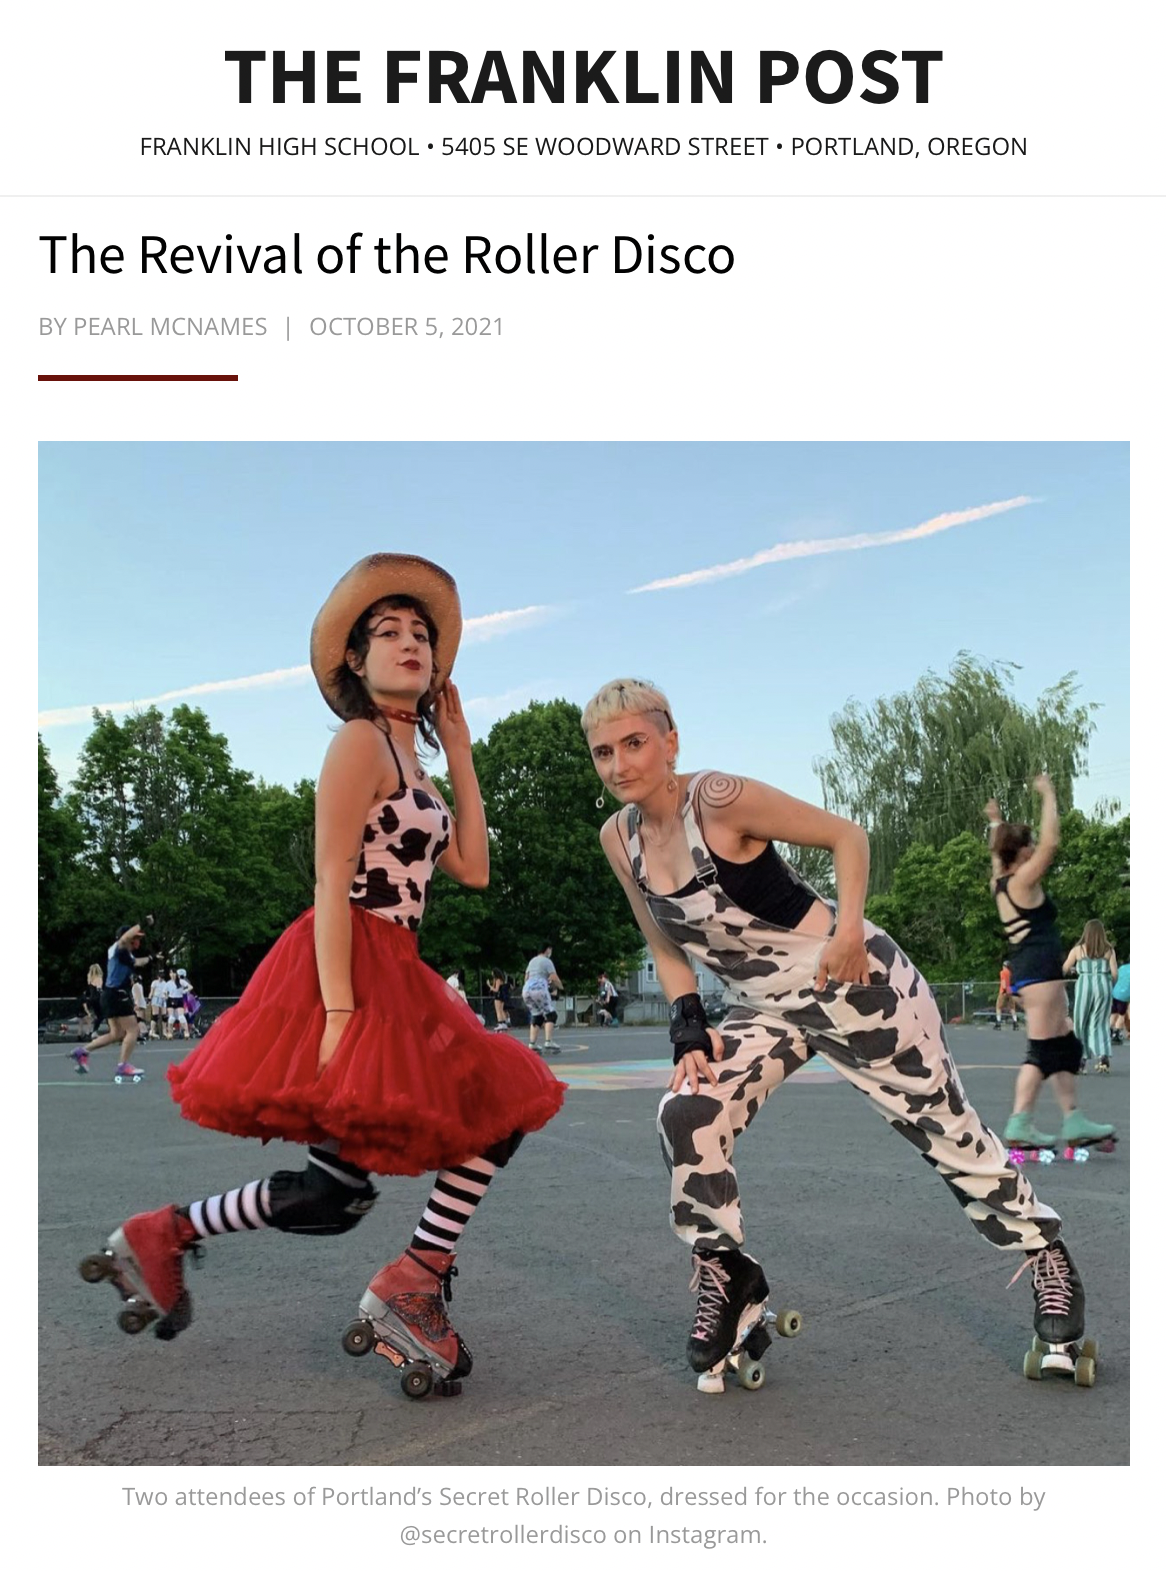 Screenshot of an article on the Franklin Post website with the following text: The Revival of the Roller Disco, by Pearl Mcnames posted on October 5, 2021. A picture of two roller skaters in cow print clothing.